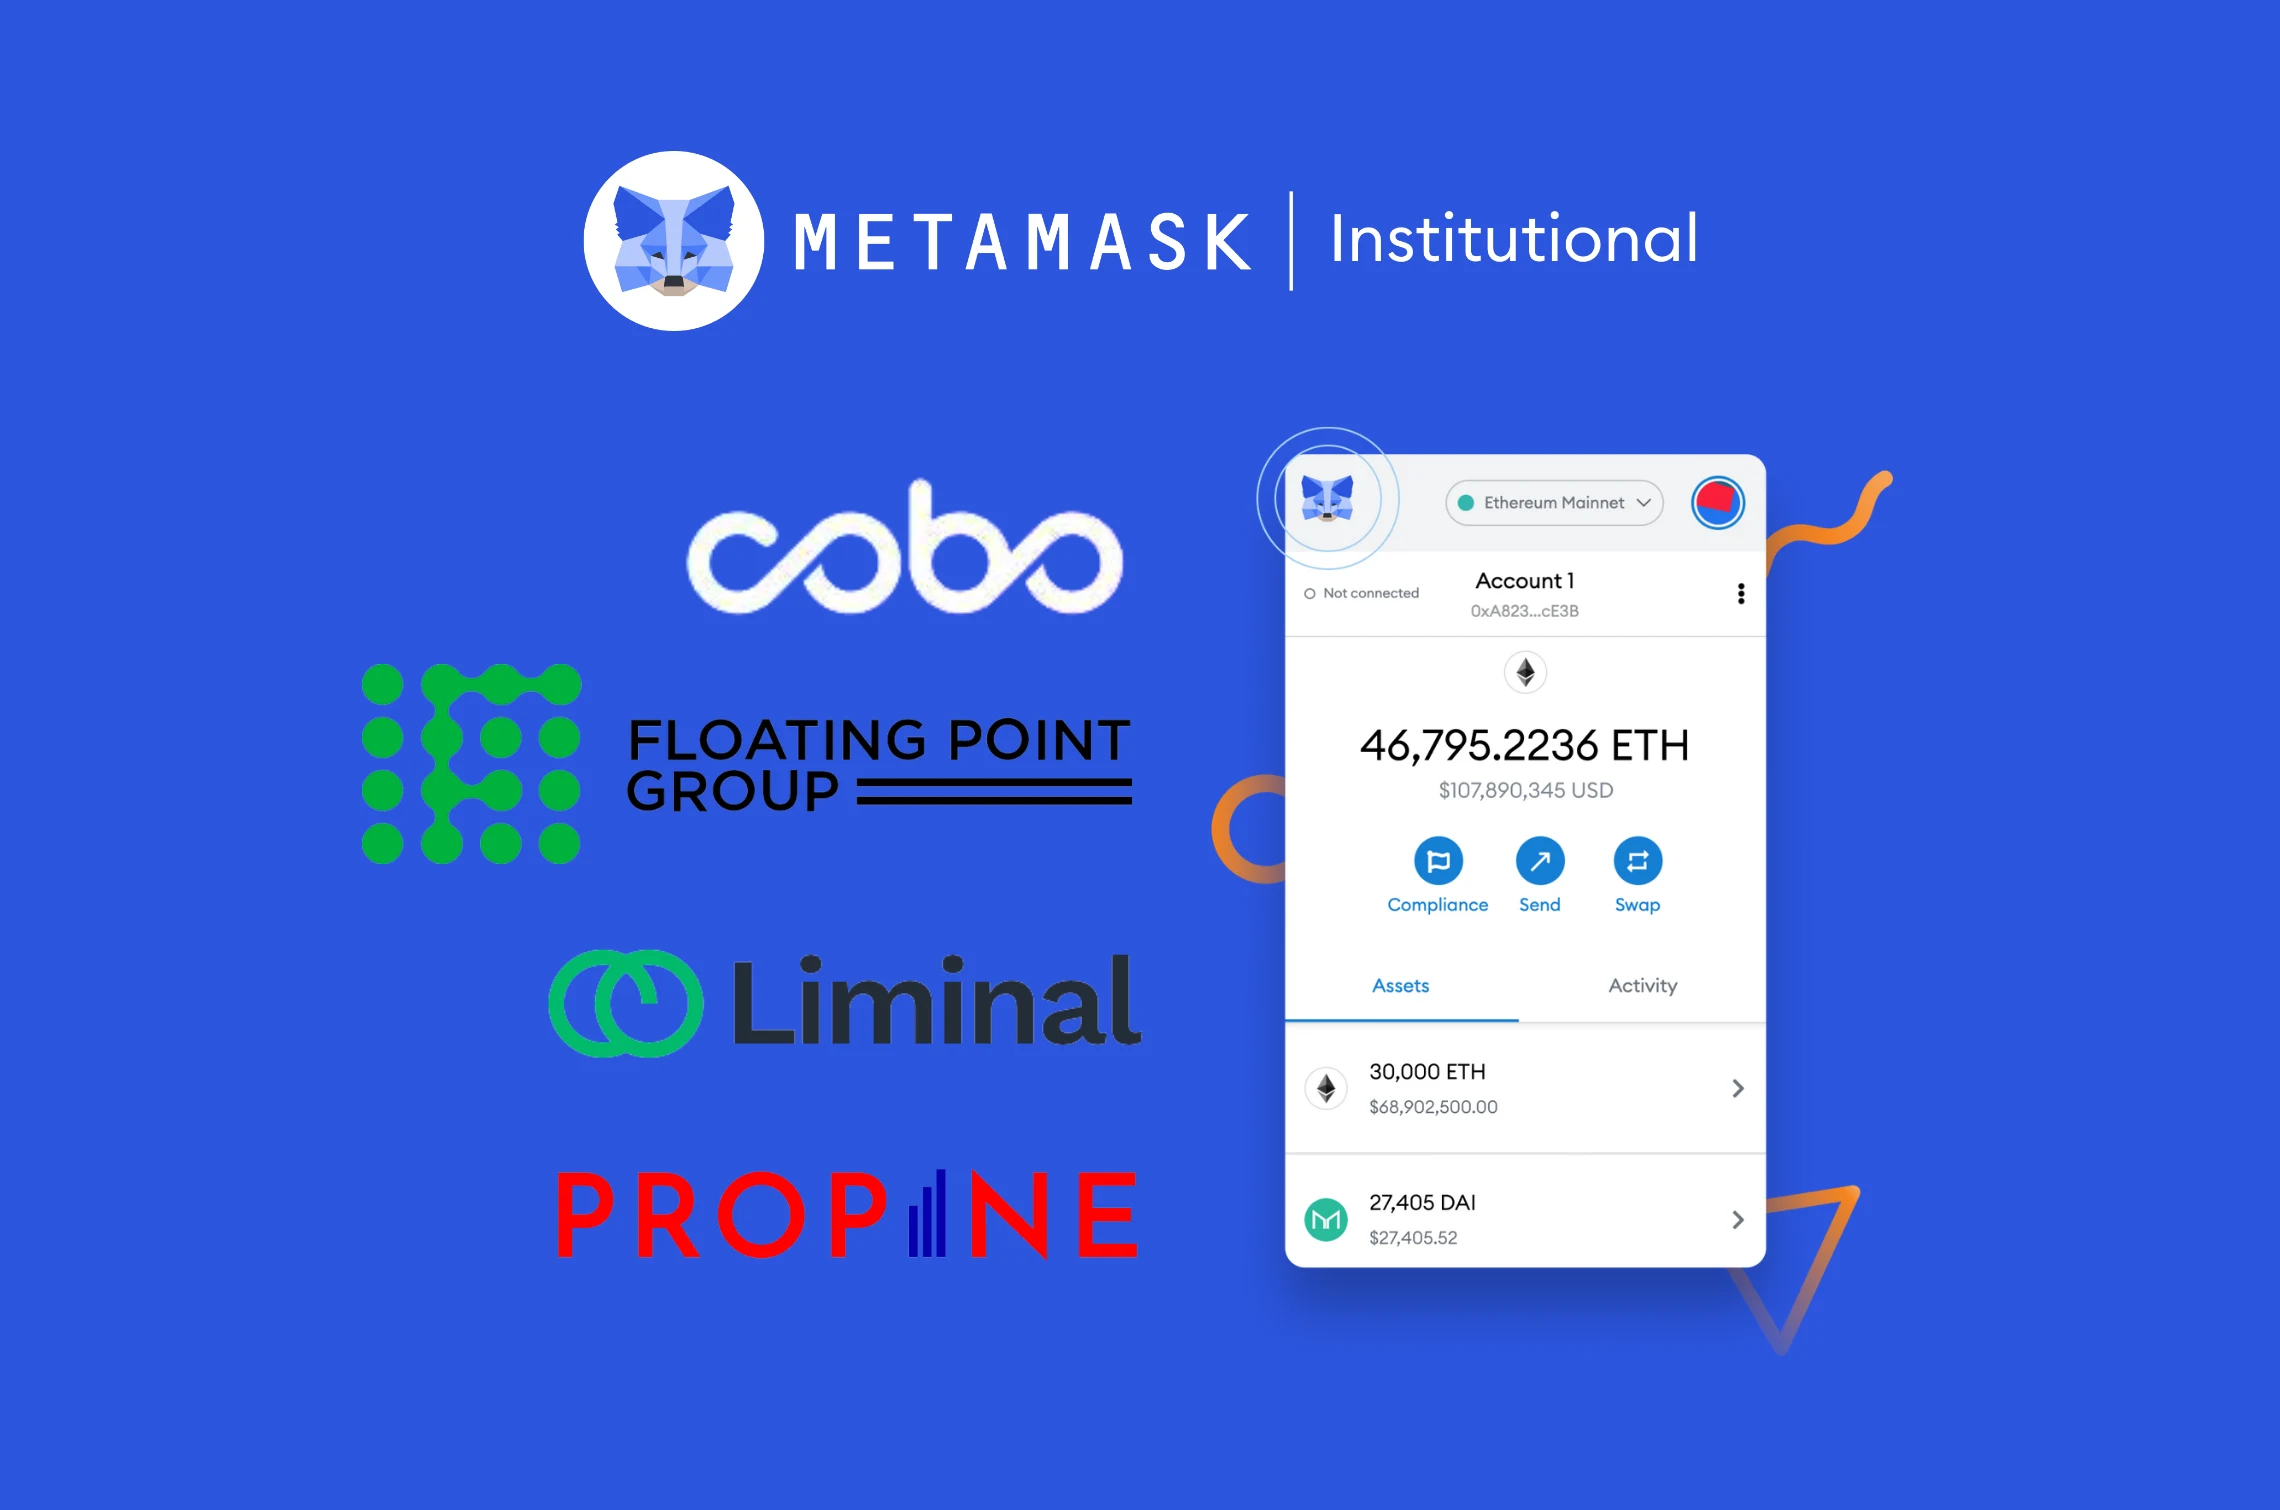 Image: MetaMask Institutional Onboards Four New Institutional Custodians, Consolidating its Leadership as the Go-to Solution for Organizations Entering Web3 